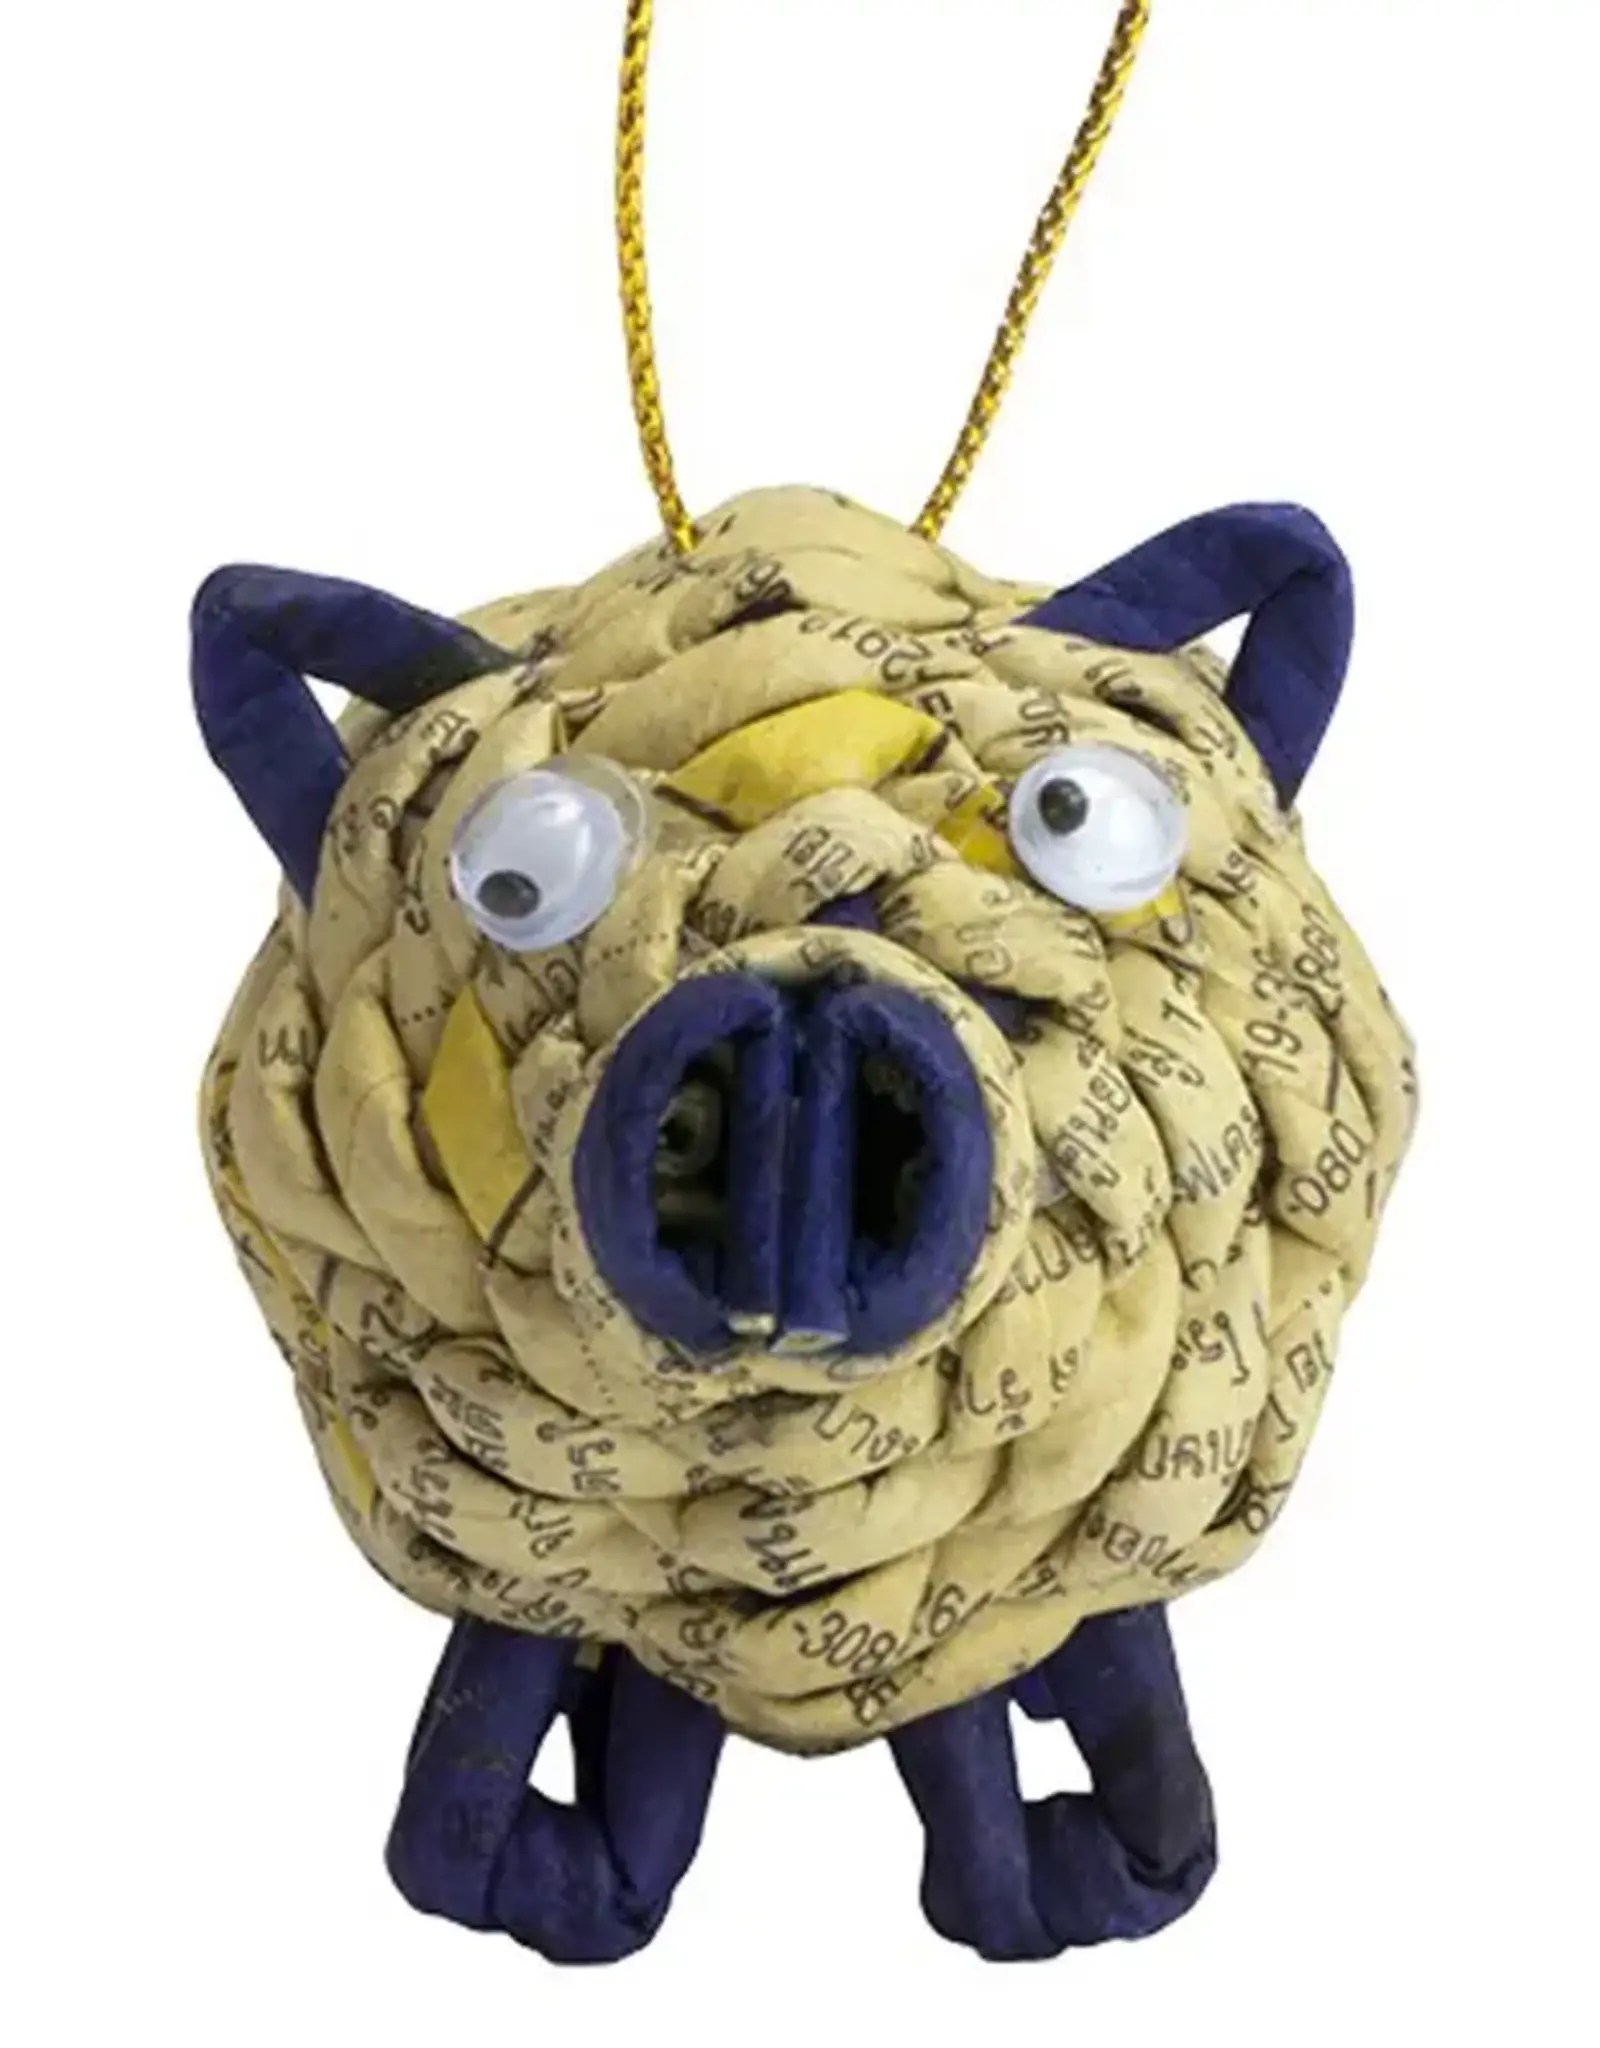 Marquet Upcycled Pig Ornament